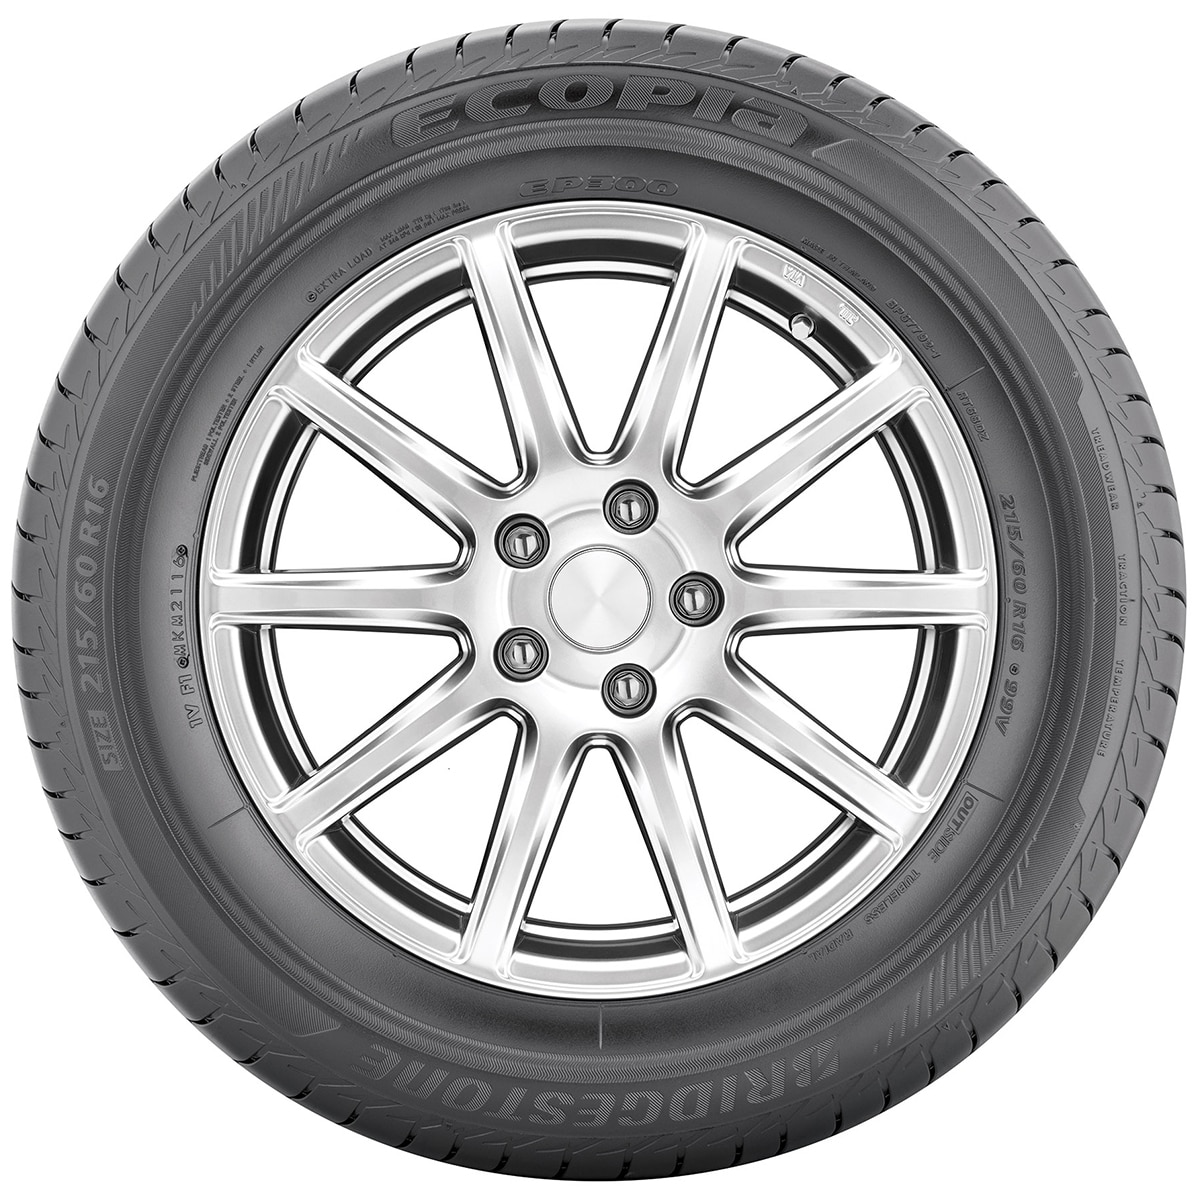 215/45R17 91W XL BS EP300 - Tyre